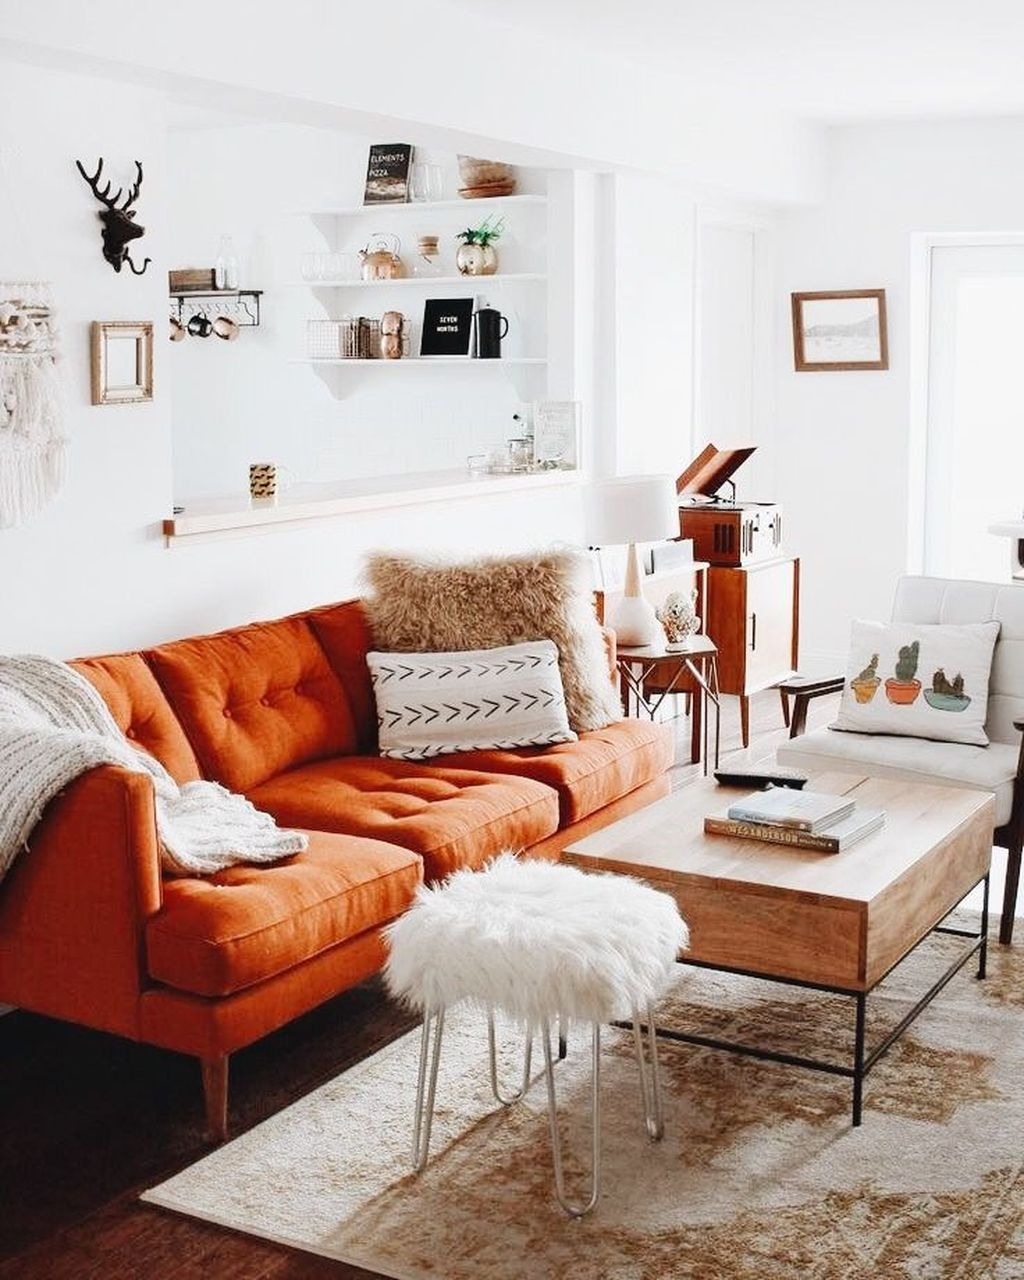 The Best Decorations Industrial Style Living Room That Will Amaze Your Guests35